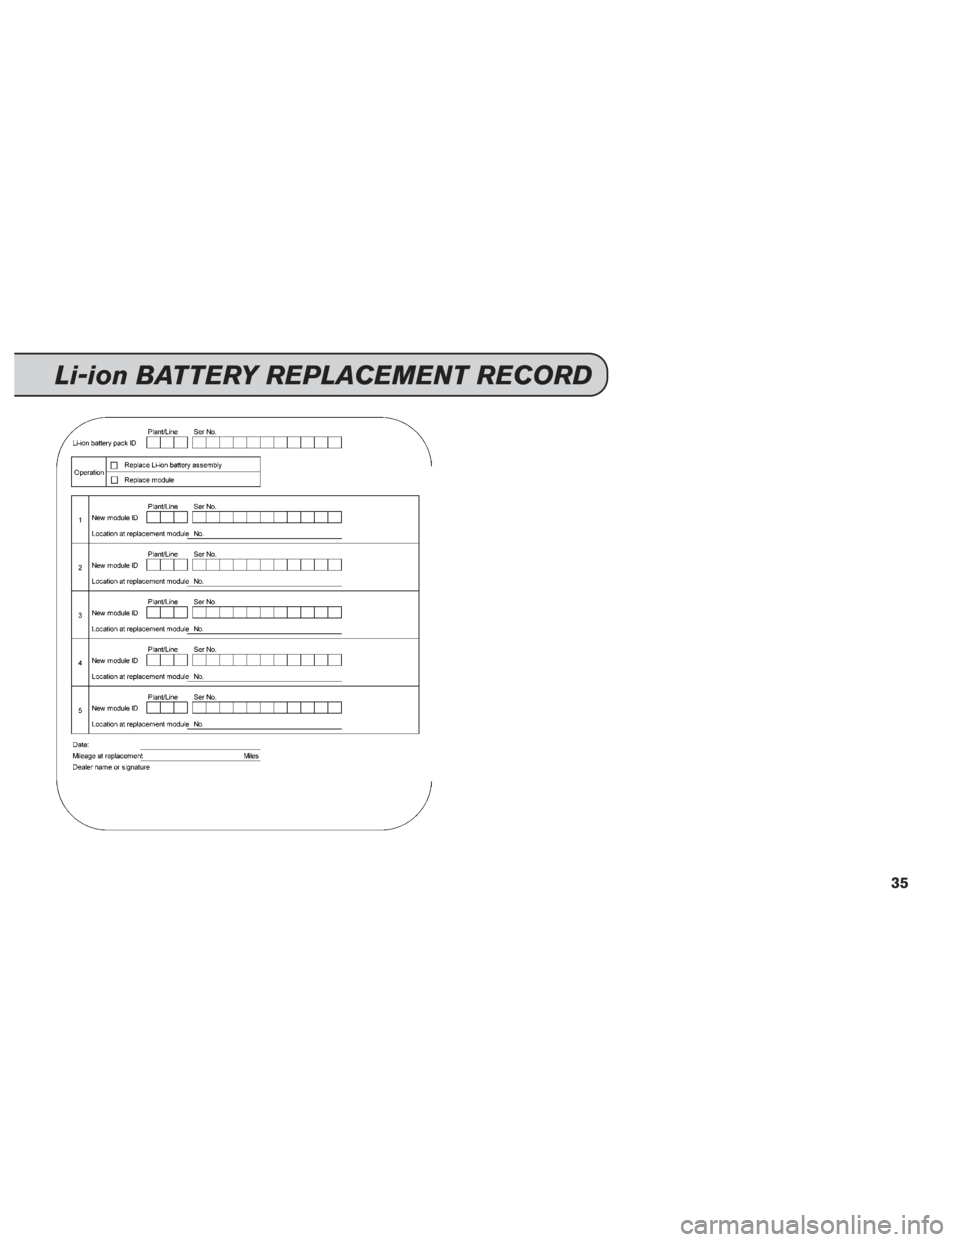 NISSAN LEAF 2015 1.G Service And Maintenance Guide Li-ion BATTERY REPLACEMENT RECORD
35 